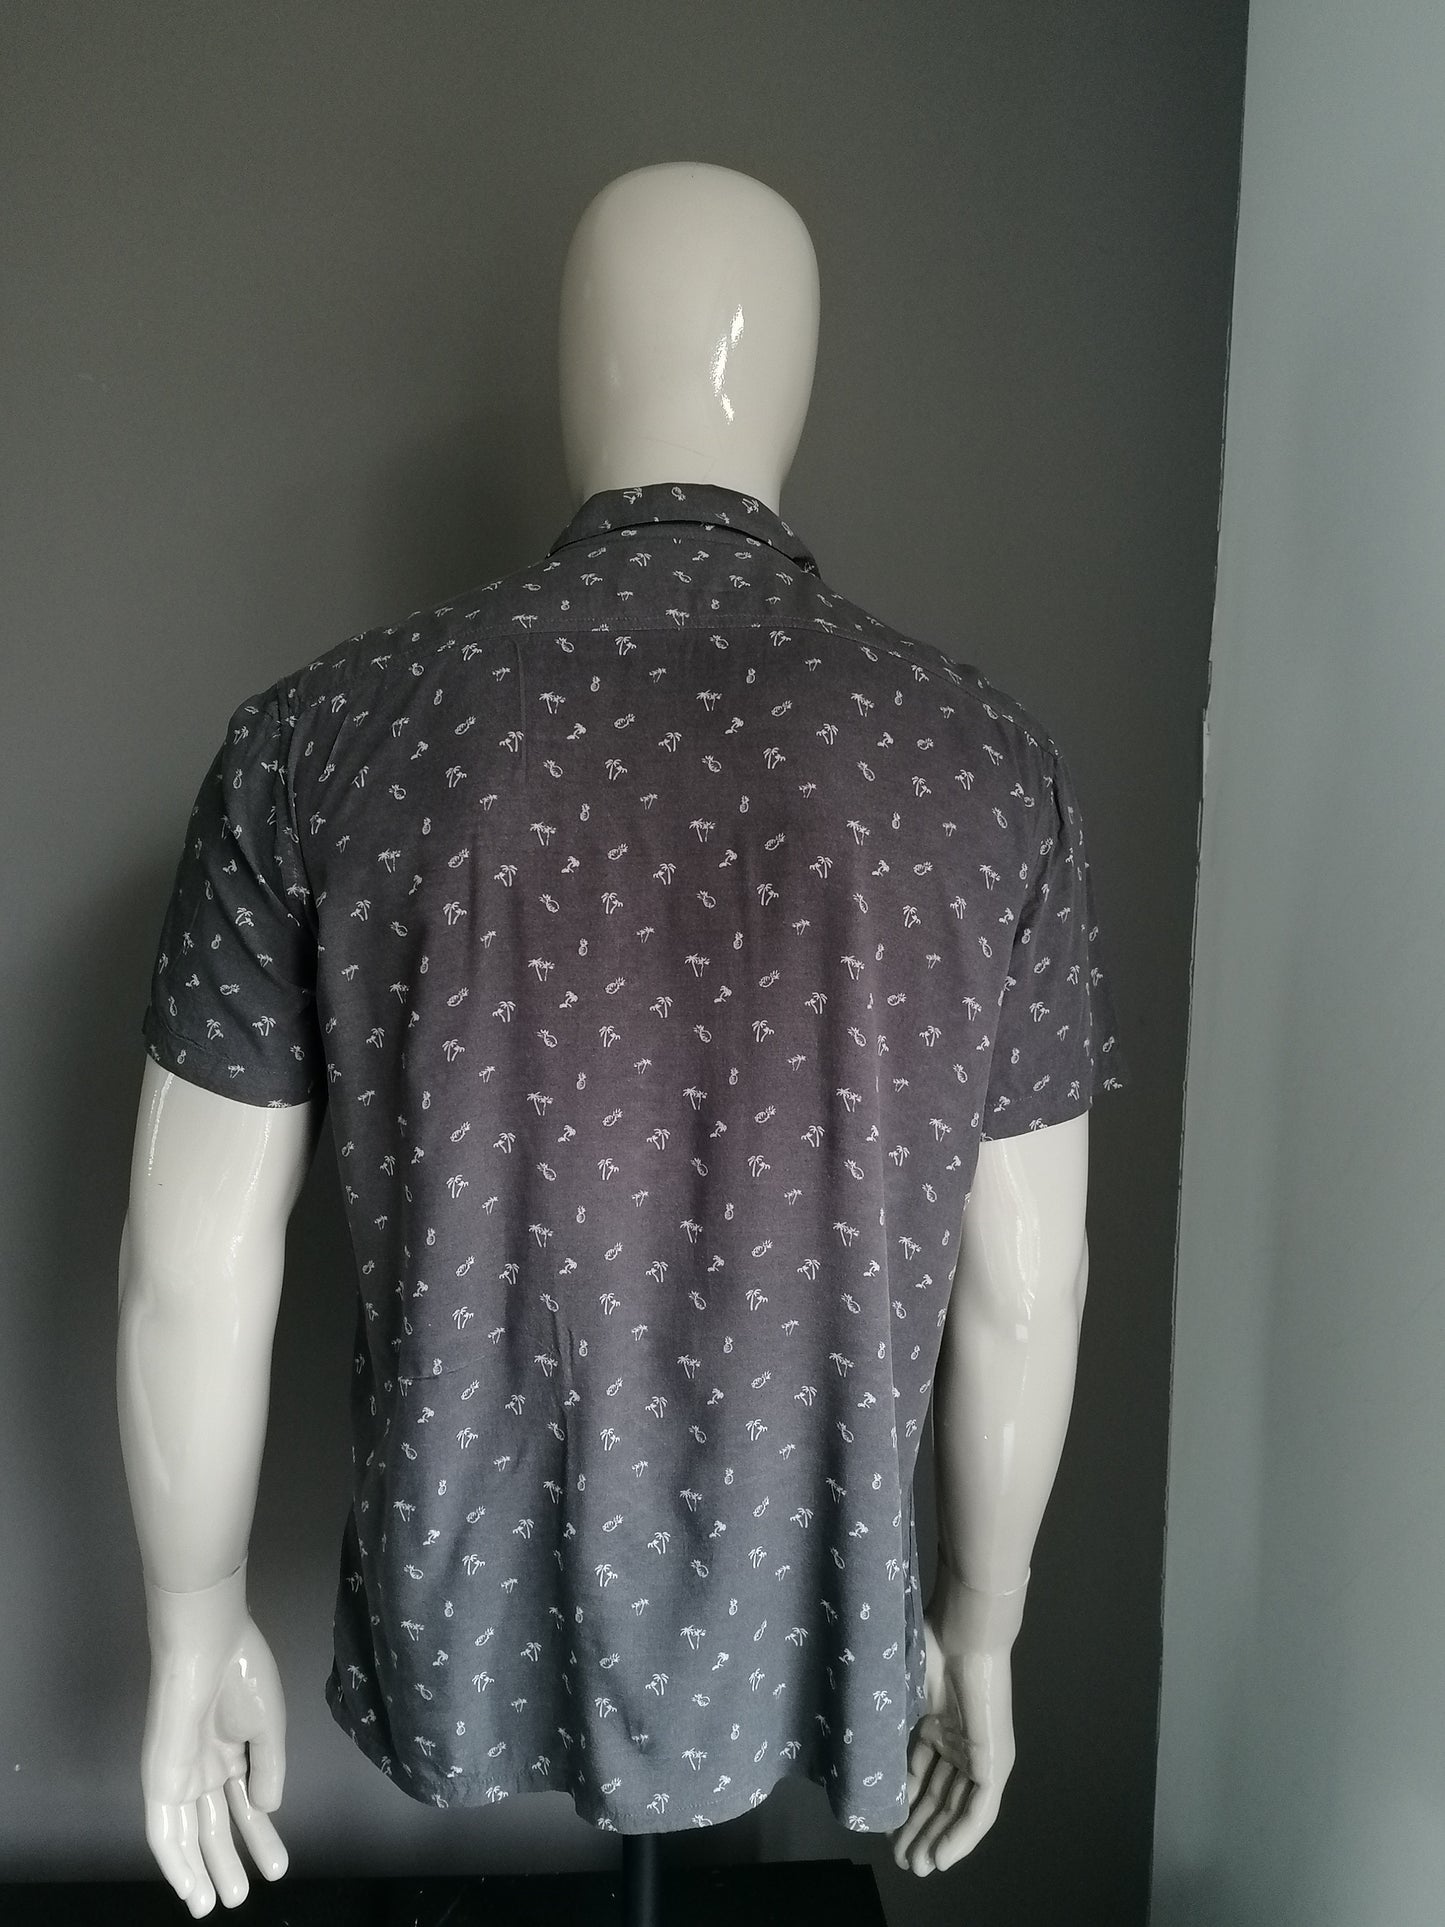 Vintage casual by Gemo shirt short sleeves. Gray palm / pineapple print. Size M / L. Viscose